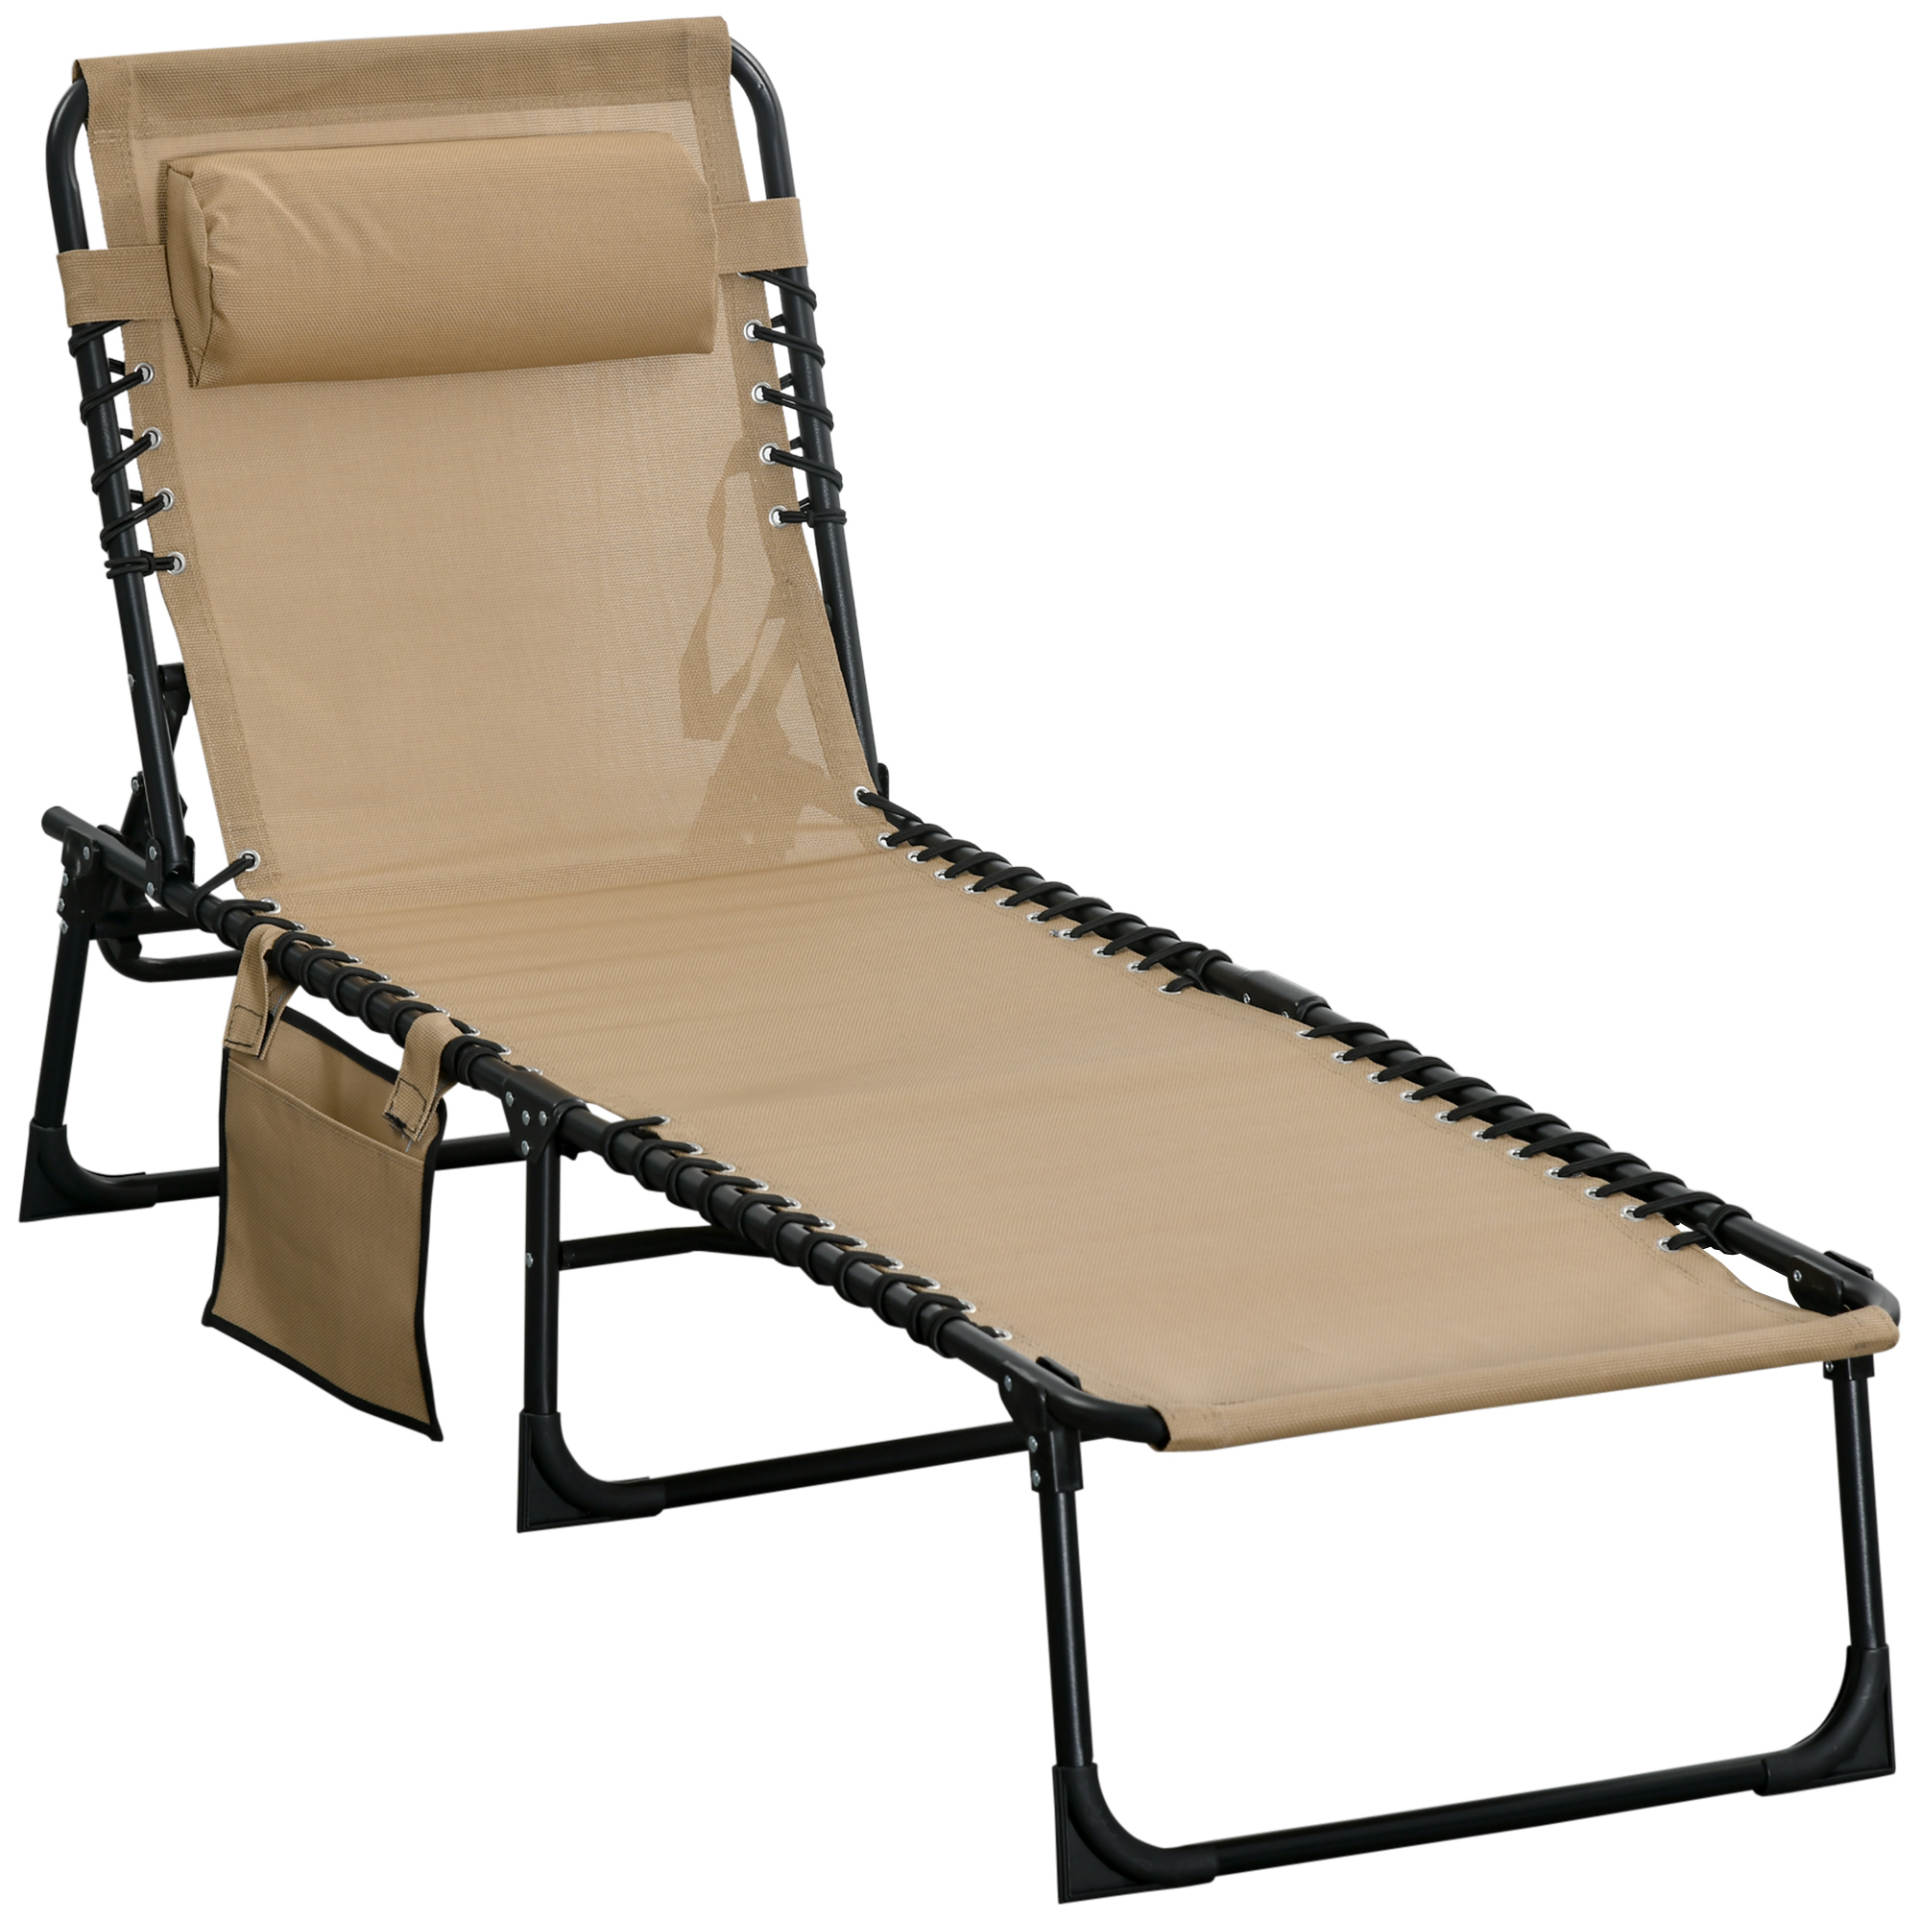 Outsunny Portable Sun Lounger, Folding Camping Bed Cot, Reclining Lounge Chair with Adjustable Backrest, Side Pocket, and Pillow - Beige Camping Chair Cosy Camping Co. Beige  